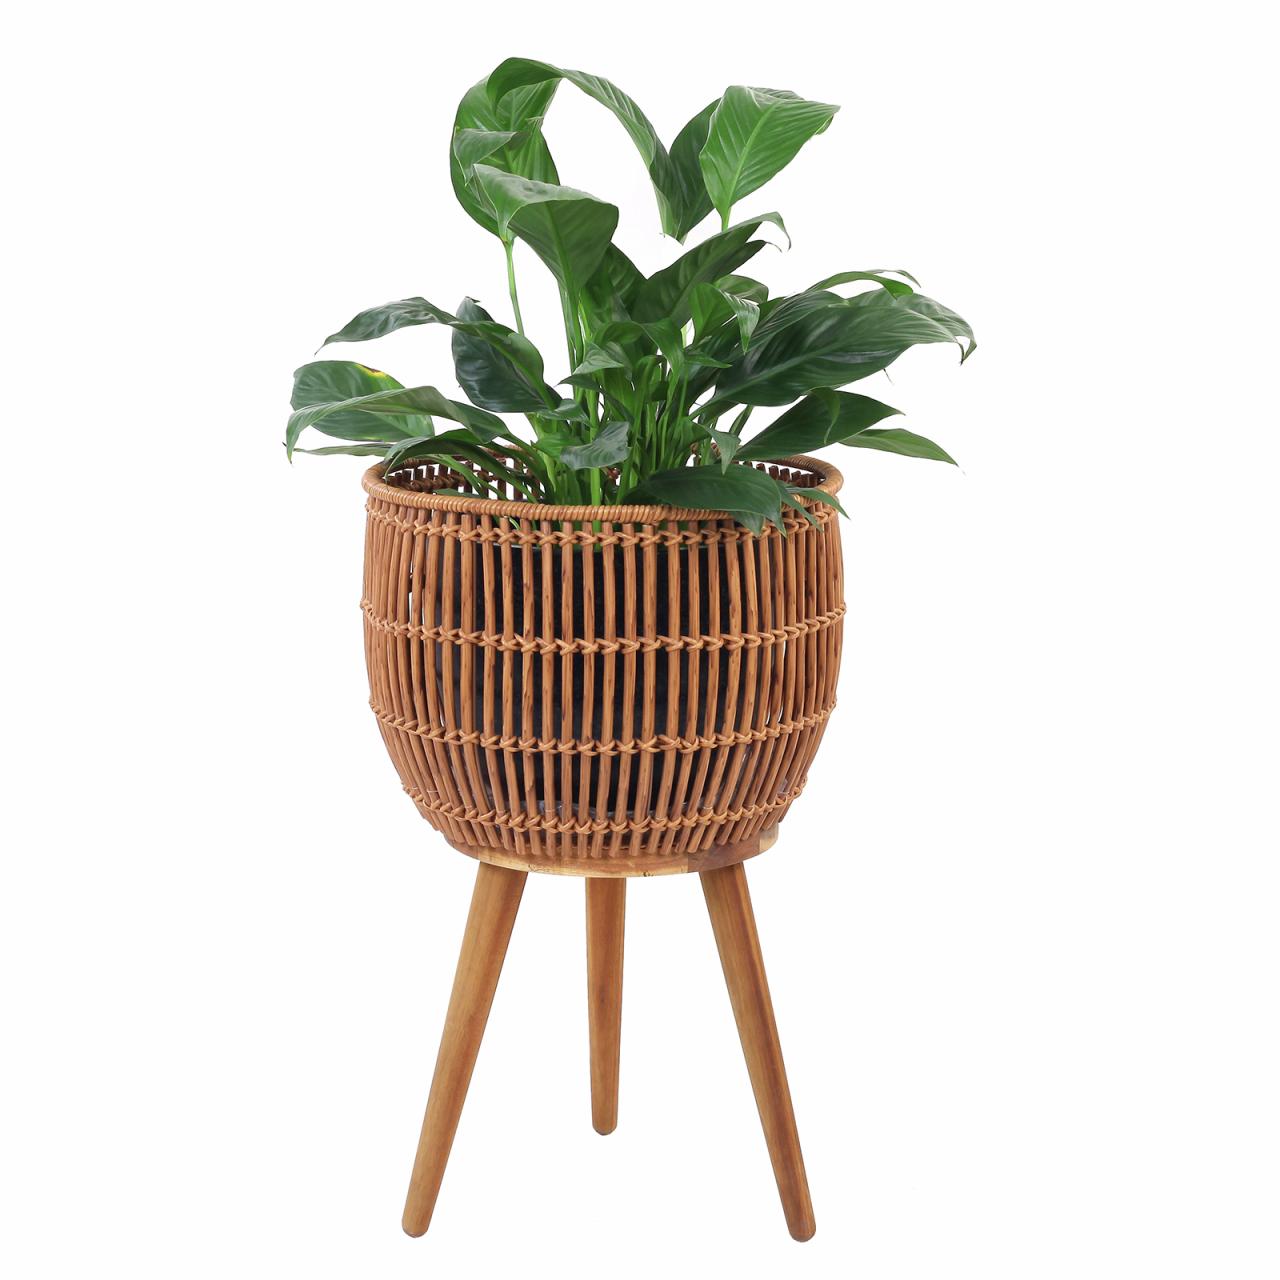 Hanging Plants Indoor | Basket Planter Bunnings: A Guide to Types, Plants, Care, and Design